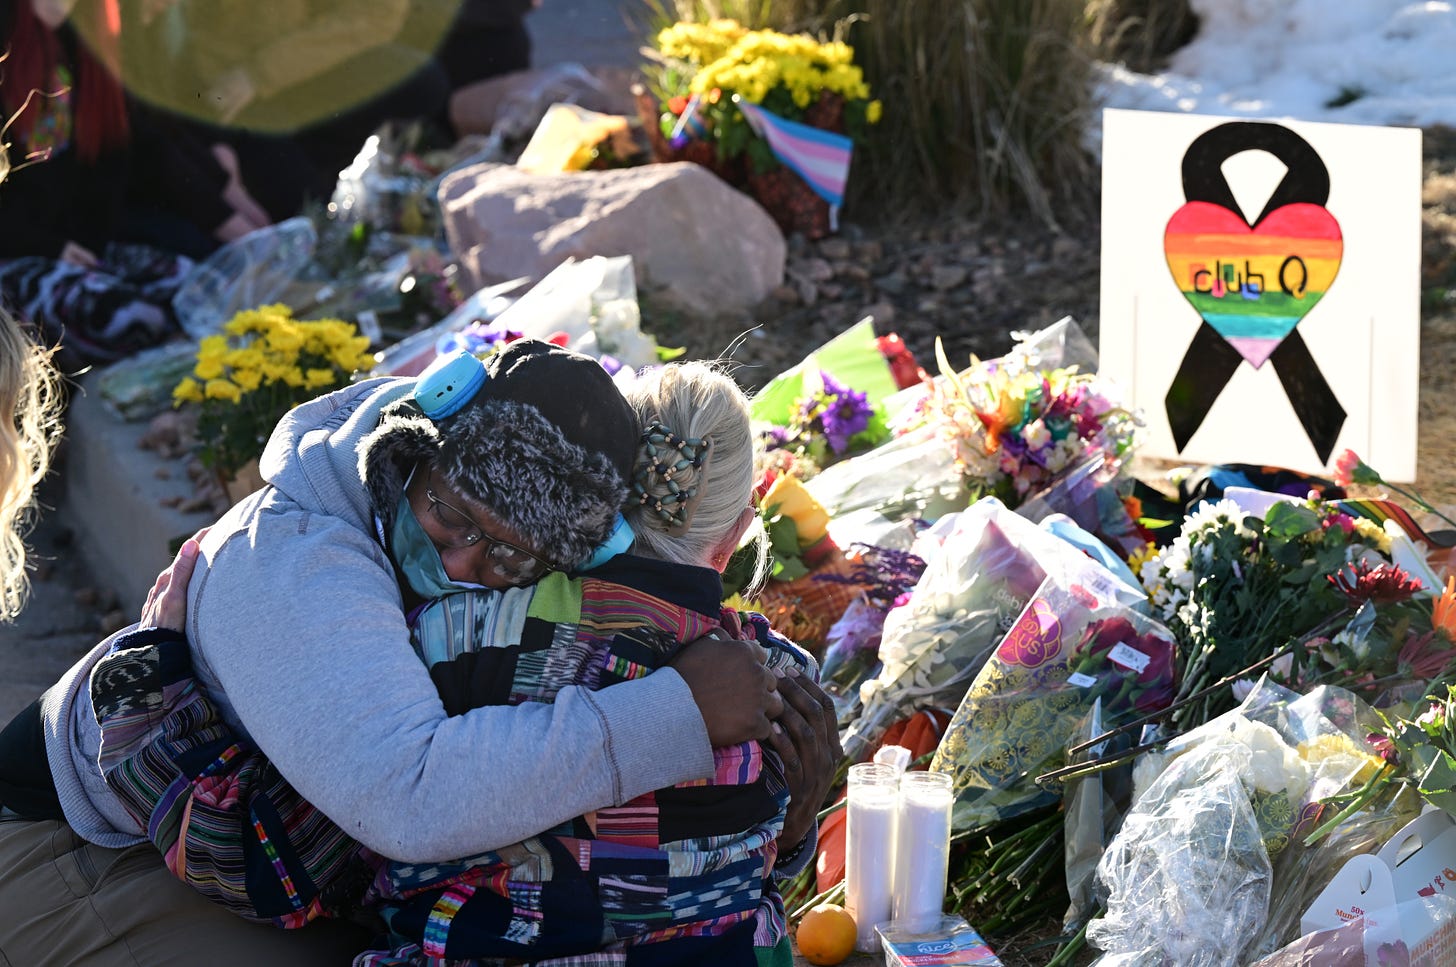 Two people embrace in front of a bed of bouquets of flowers, candles, and LGBTQ flags and signage.